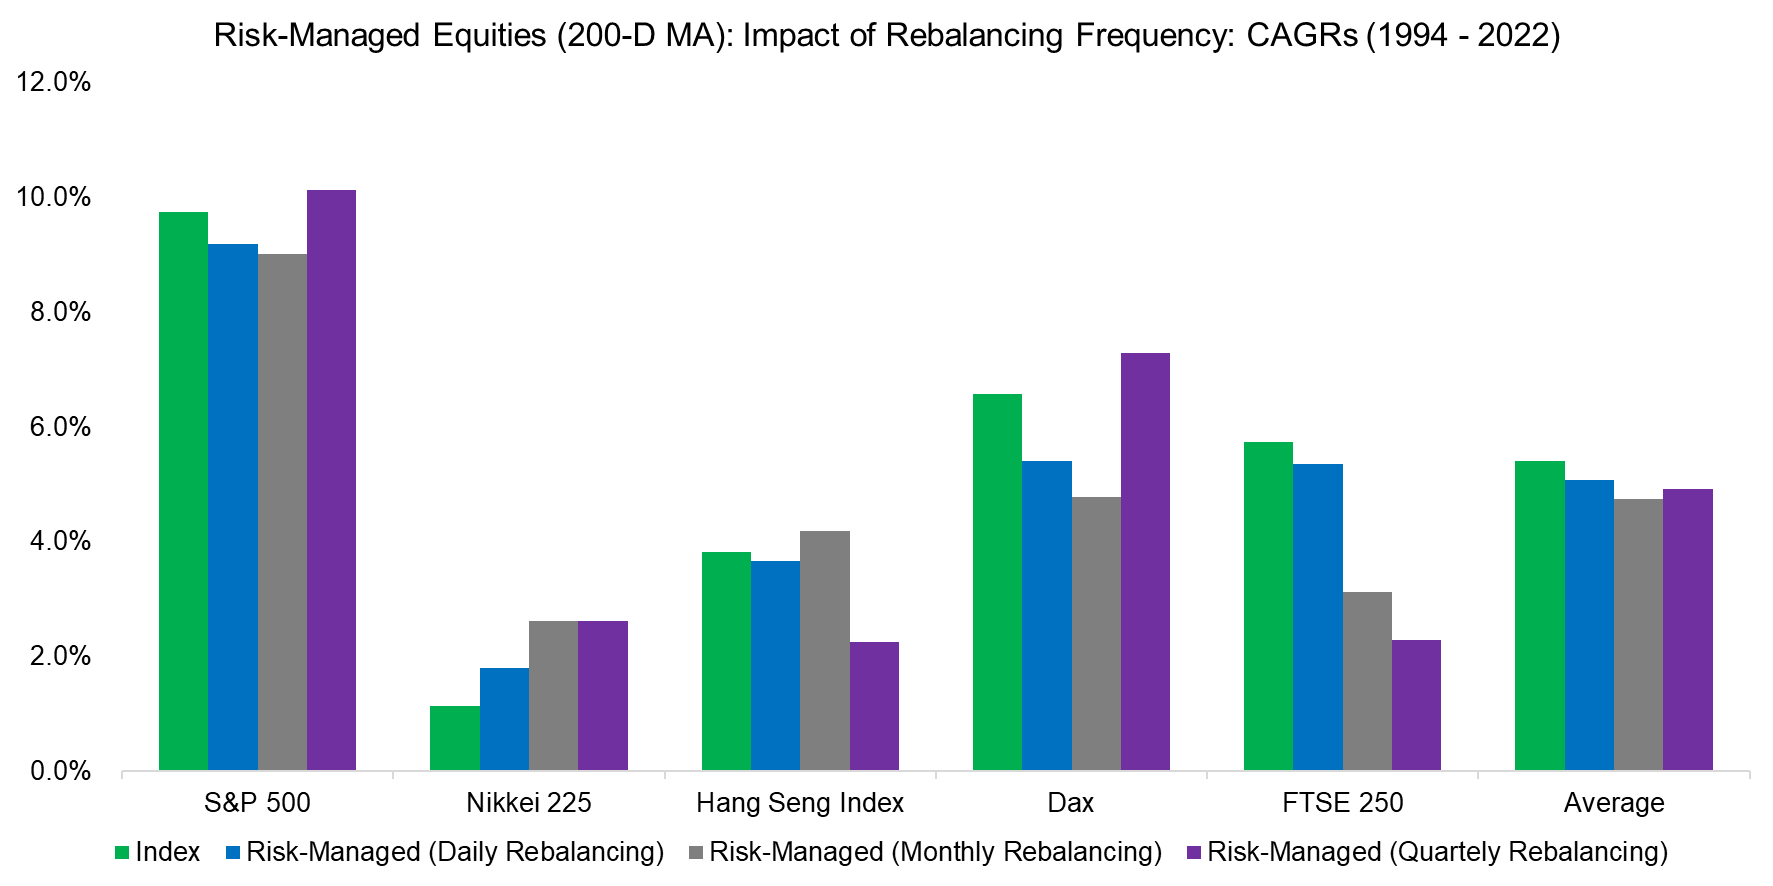 Risk-Managed Equities (200-D MA) Impact of Rebalancing Frequency CAGRs (1994 - 2022)